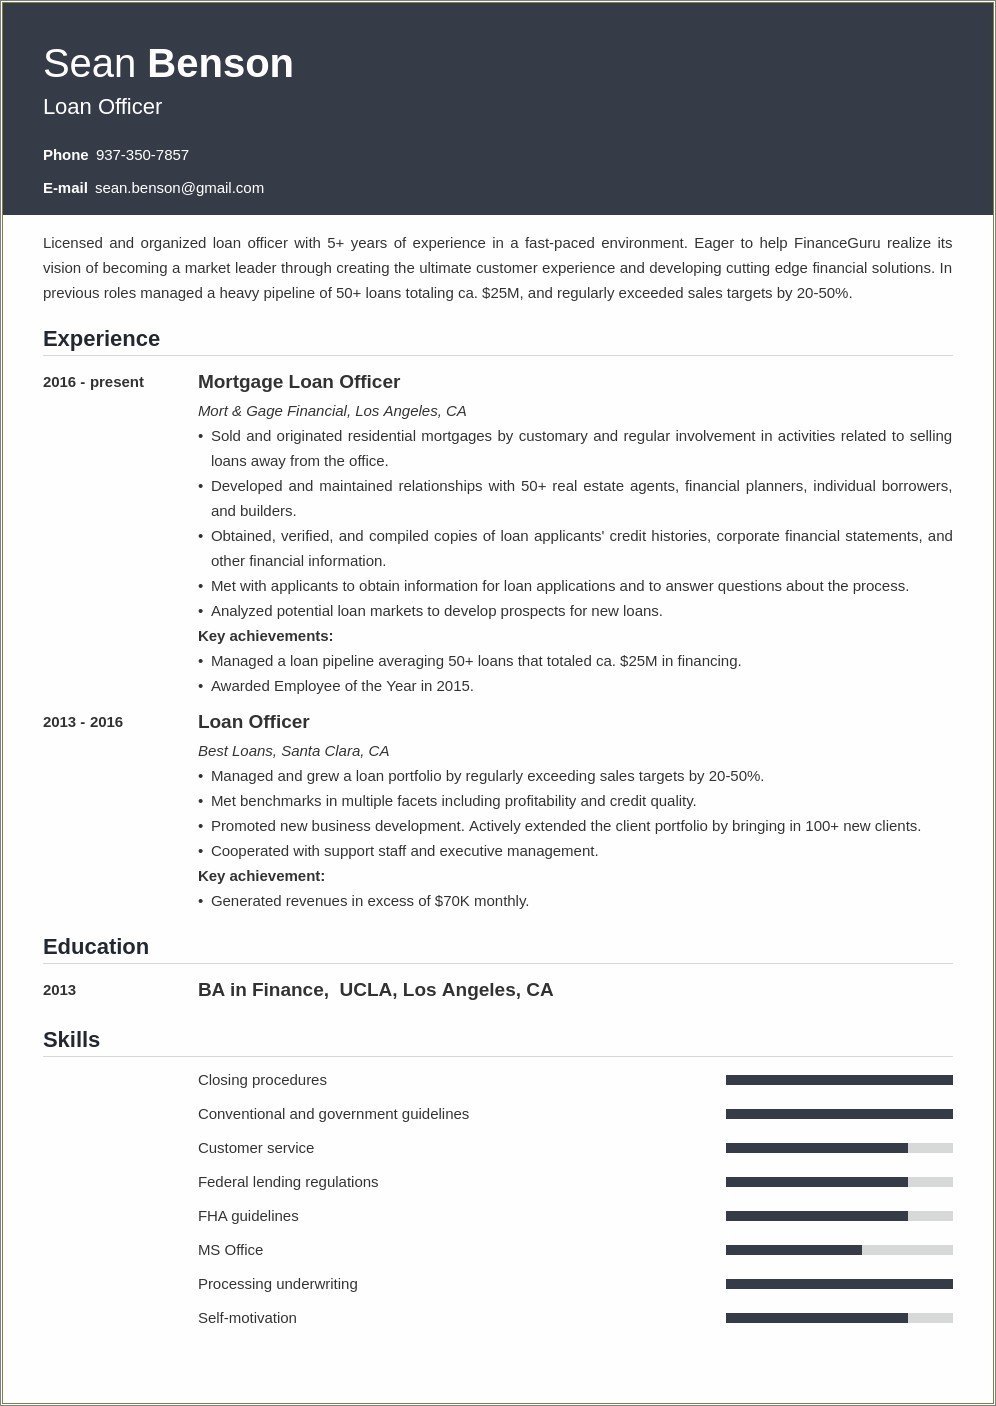 Resume Summary Examples For Loan Officers